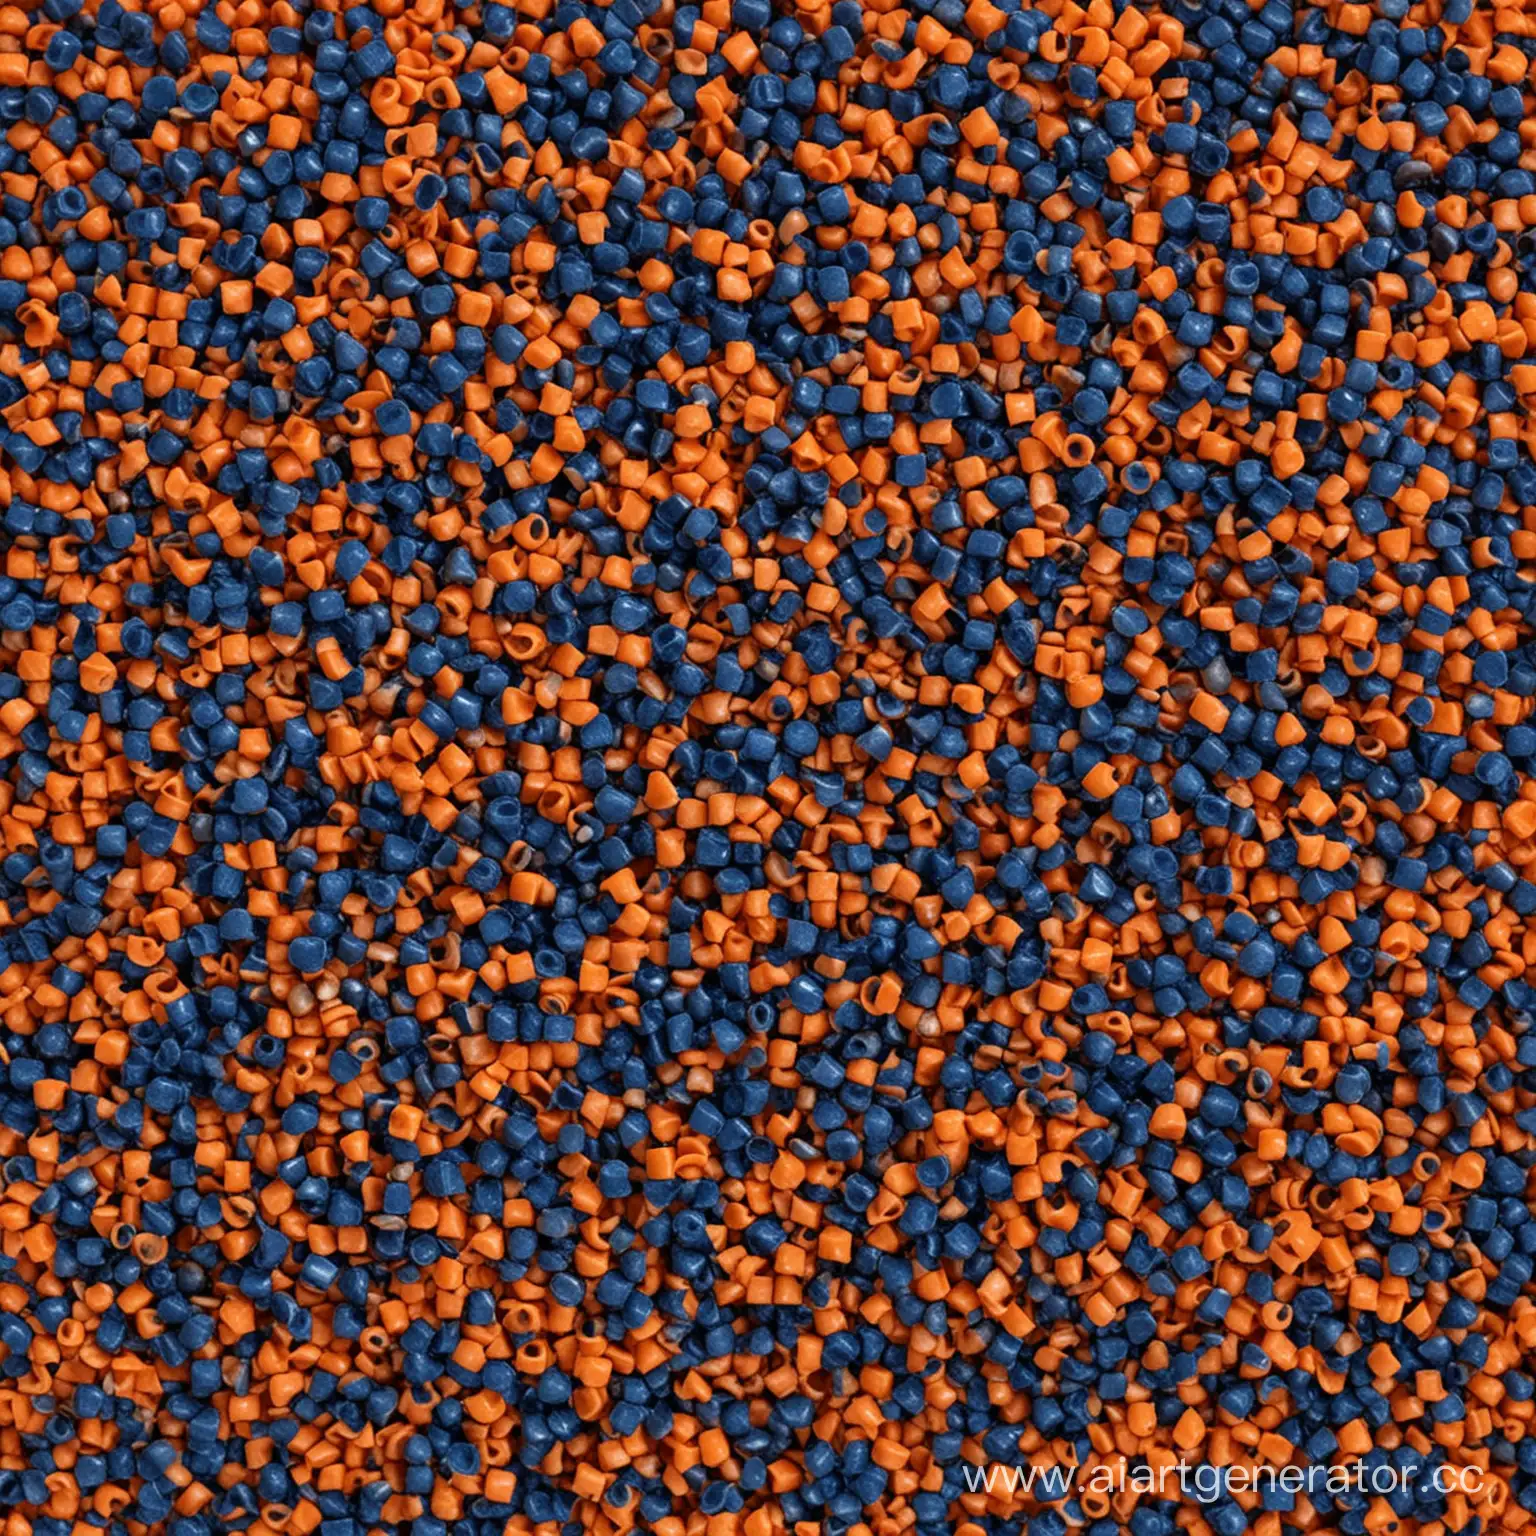 Colorful-Plastic-Crumbs-on-Dark-Blue-Background